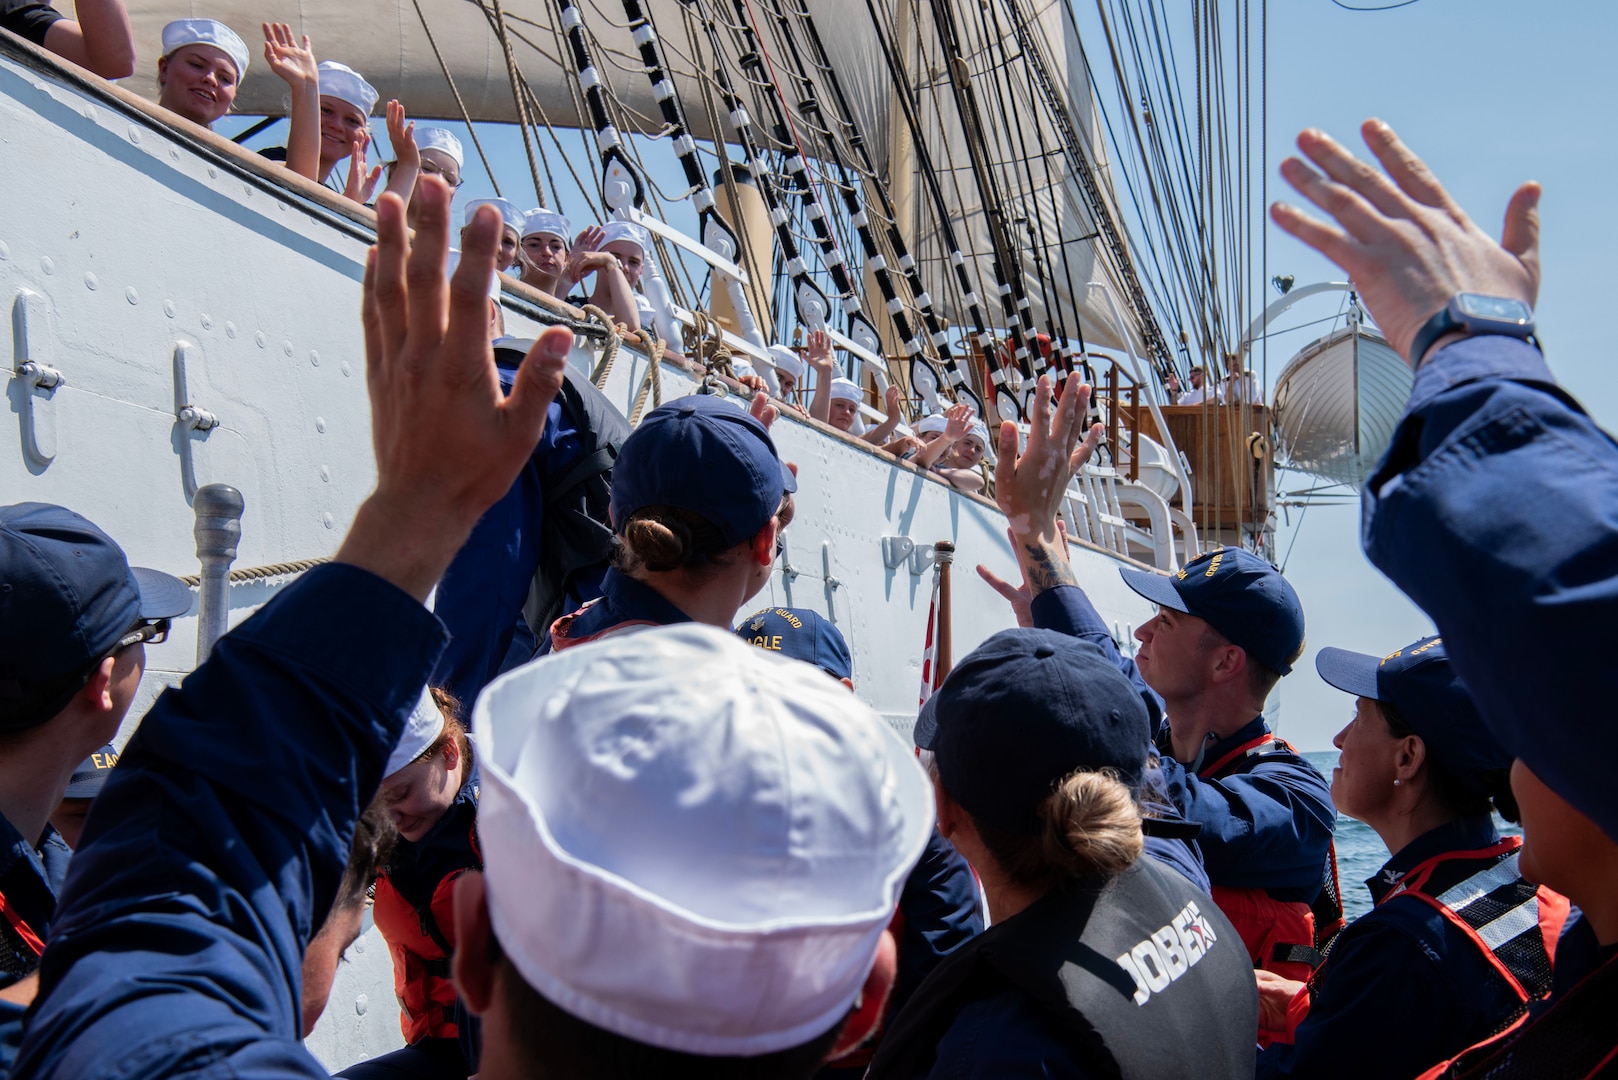 USCGC Eagle (WIX 327) crewmembers wave from a small boat to the trainees aboard the Danish training ship Danmark after taking tours aboard the ship, June 14, 2023, in the Baltic Sea. Eagle is a tall ship used as a training platform for future Coast Guard Academy officers as well as a vessel utilized for establishing and maintaining domestic and international relationships. (U.S. Coast Guard photo by Petty Officer 3rd Class Carmen Caver)